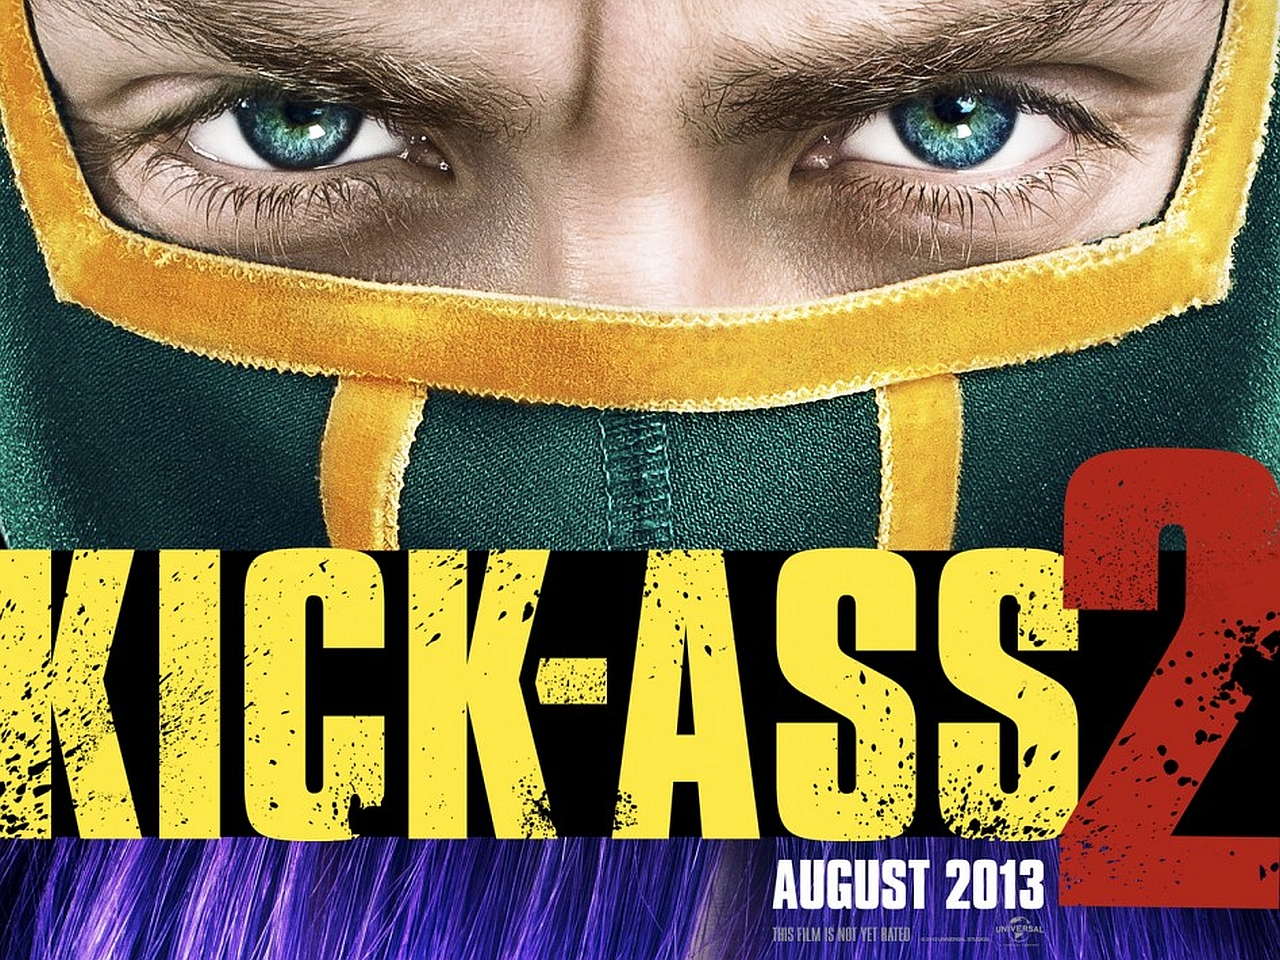 kick-ass 2 Picture